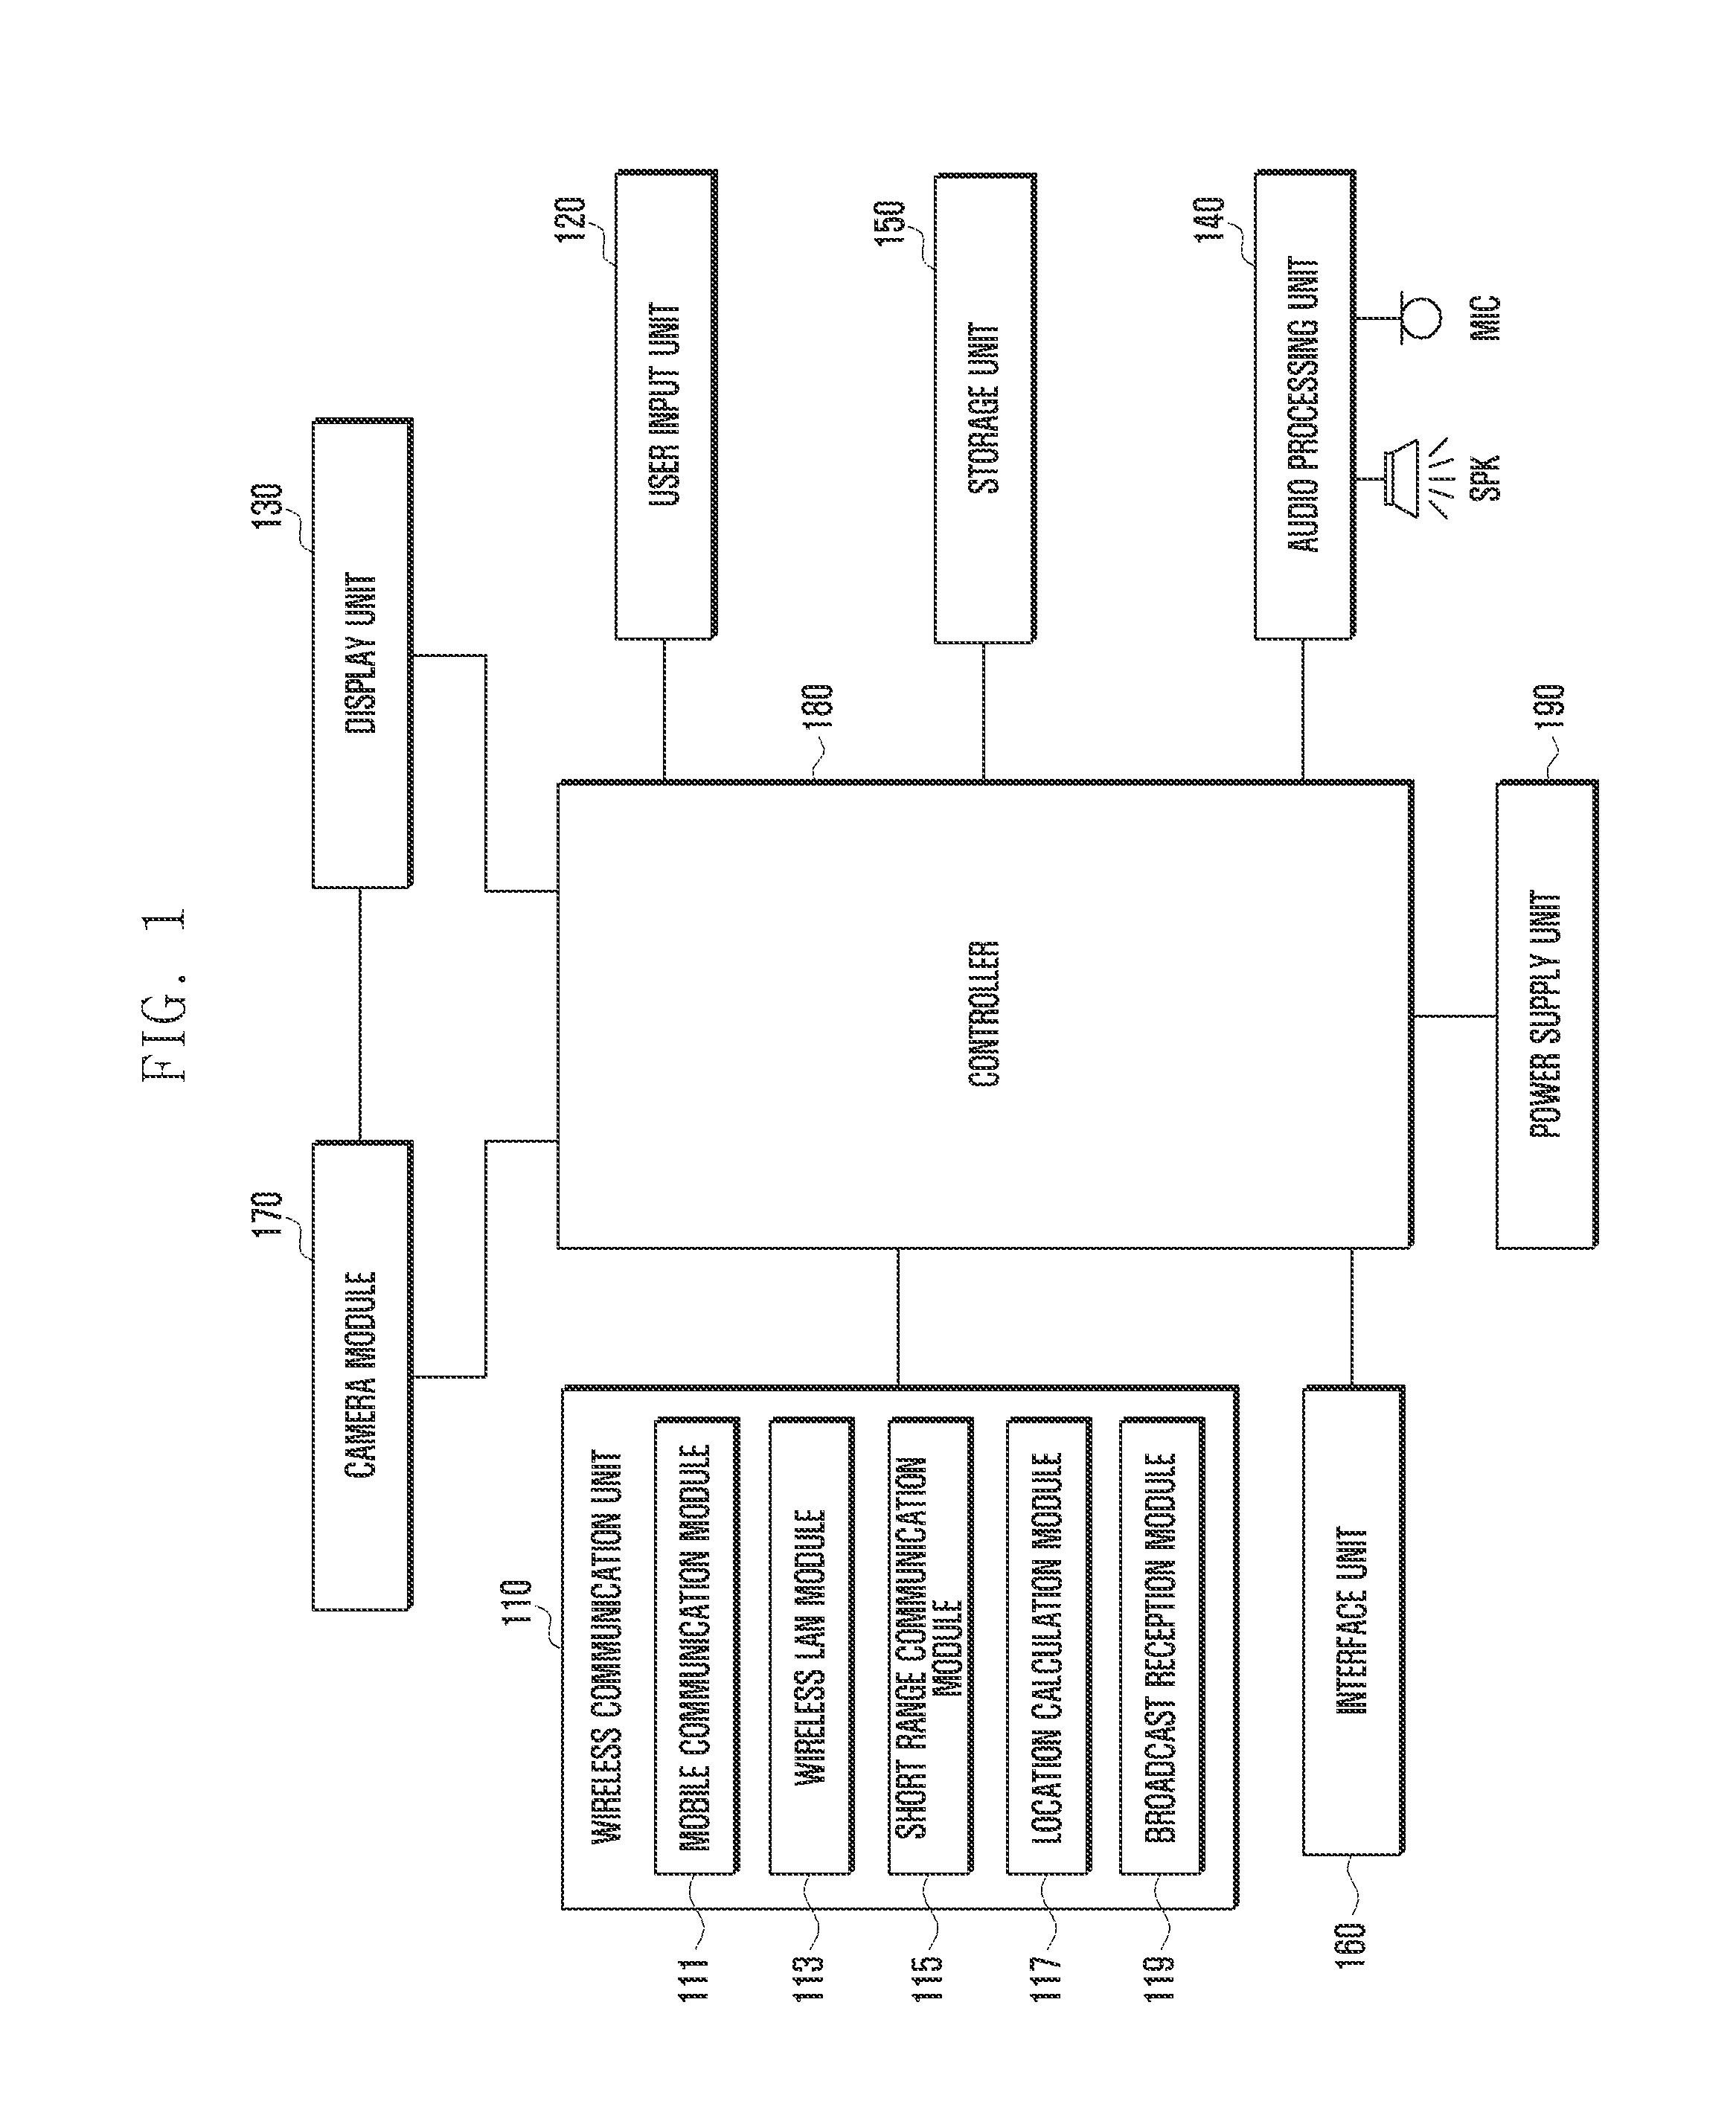 Method and apparatus for processing data using optical character reader